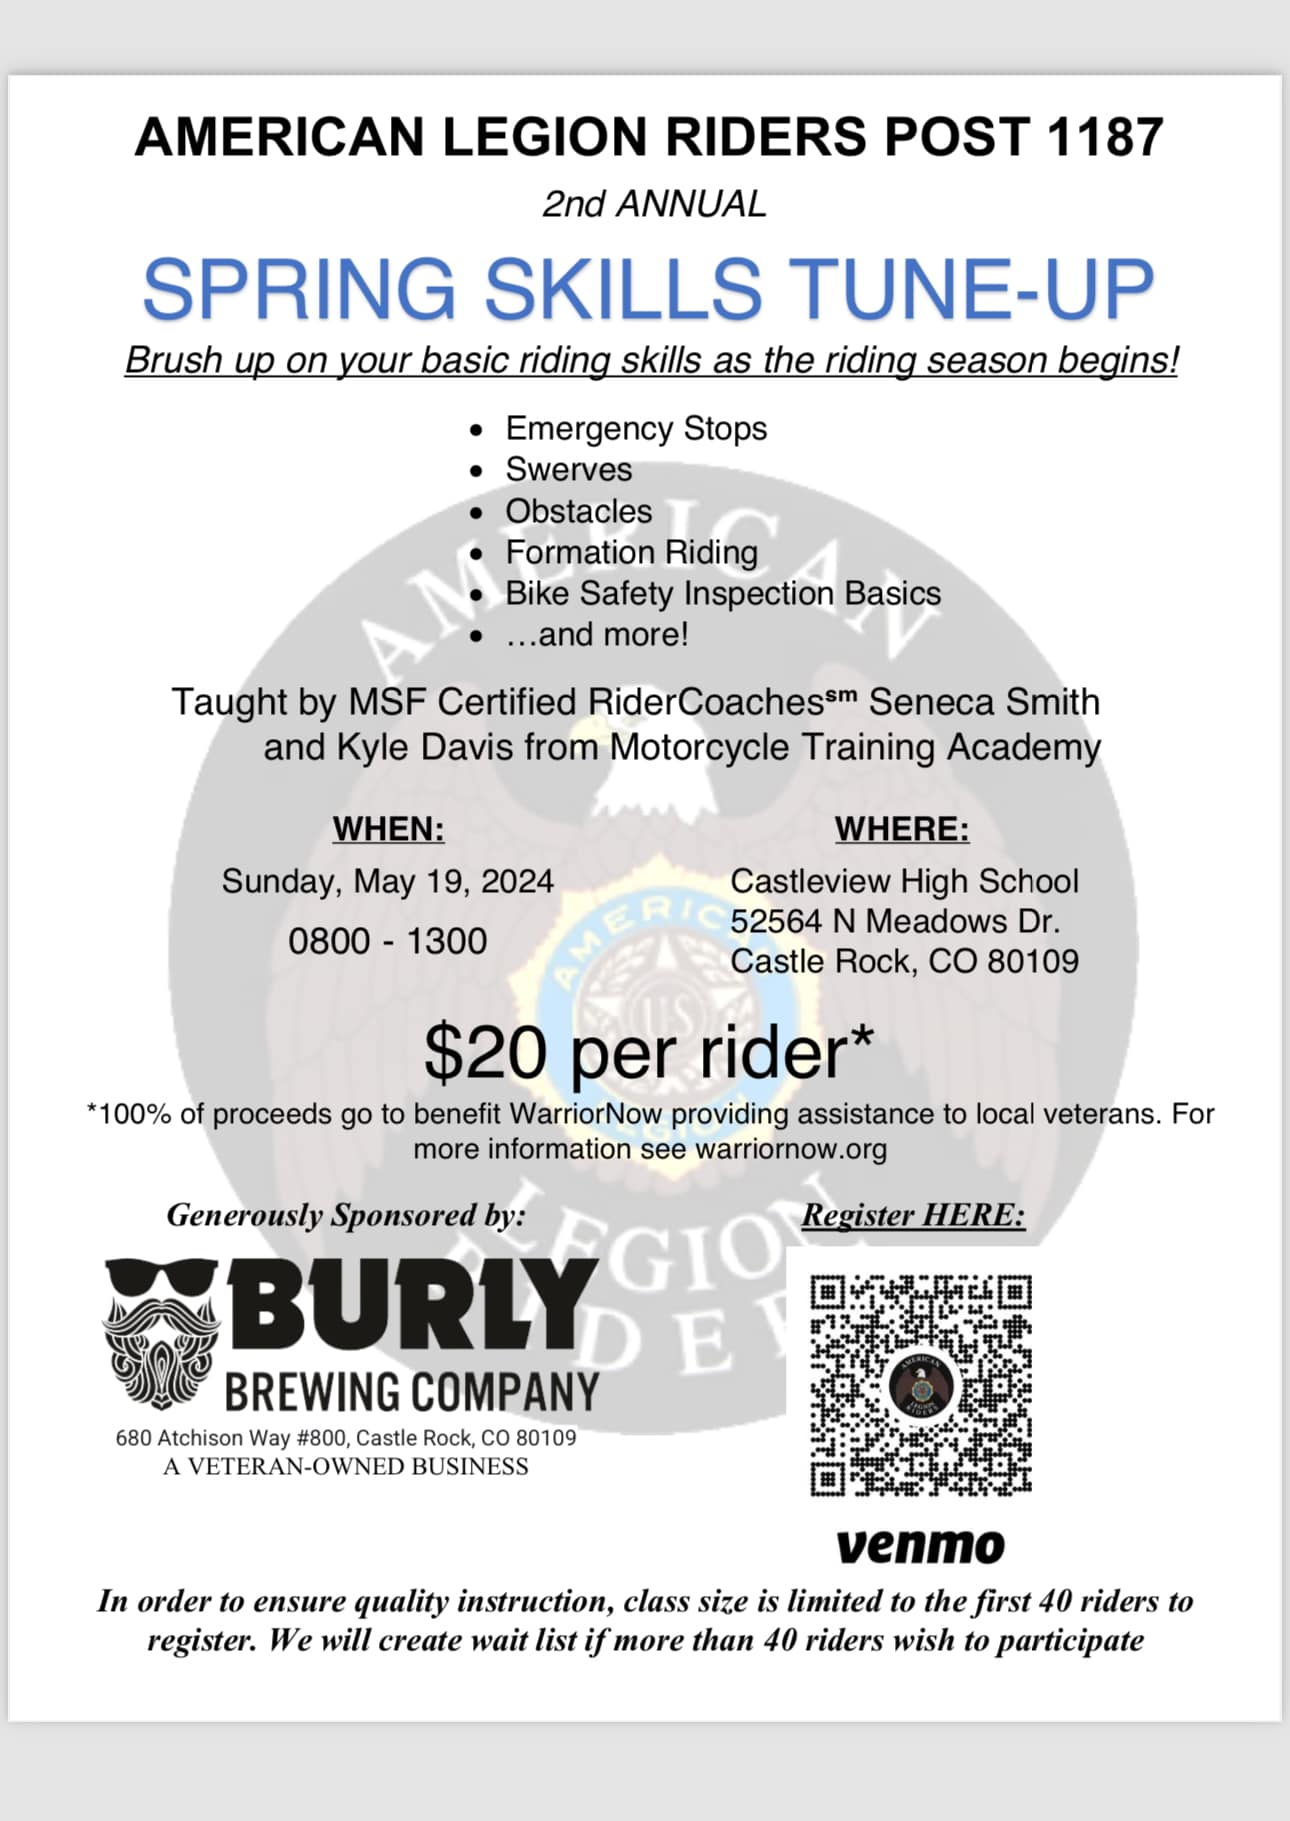 2nd Annual Spring Skills Tune-up